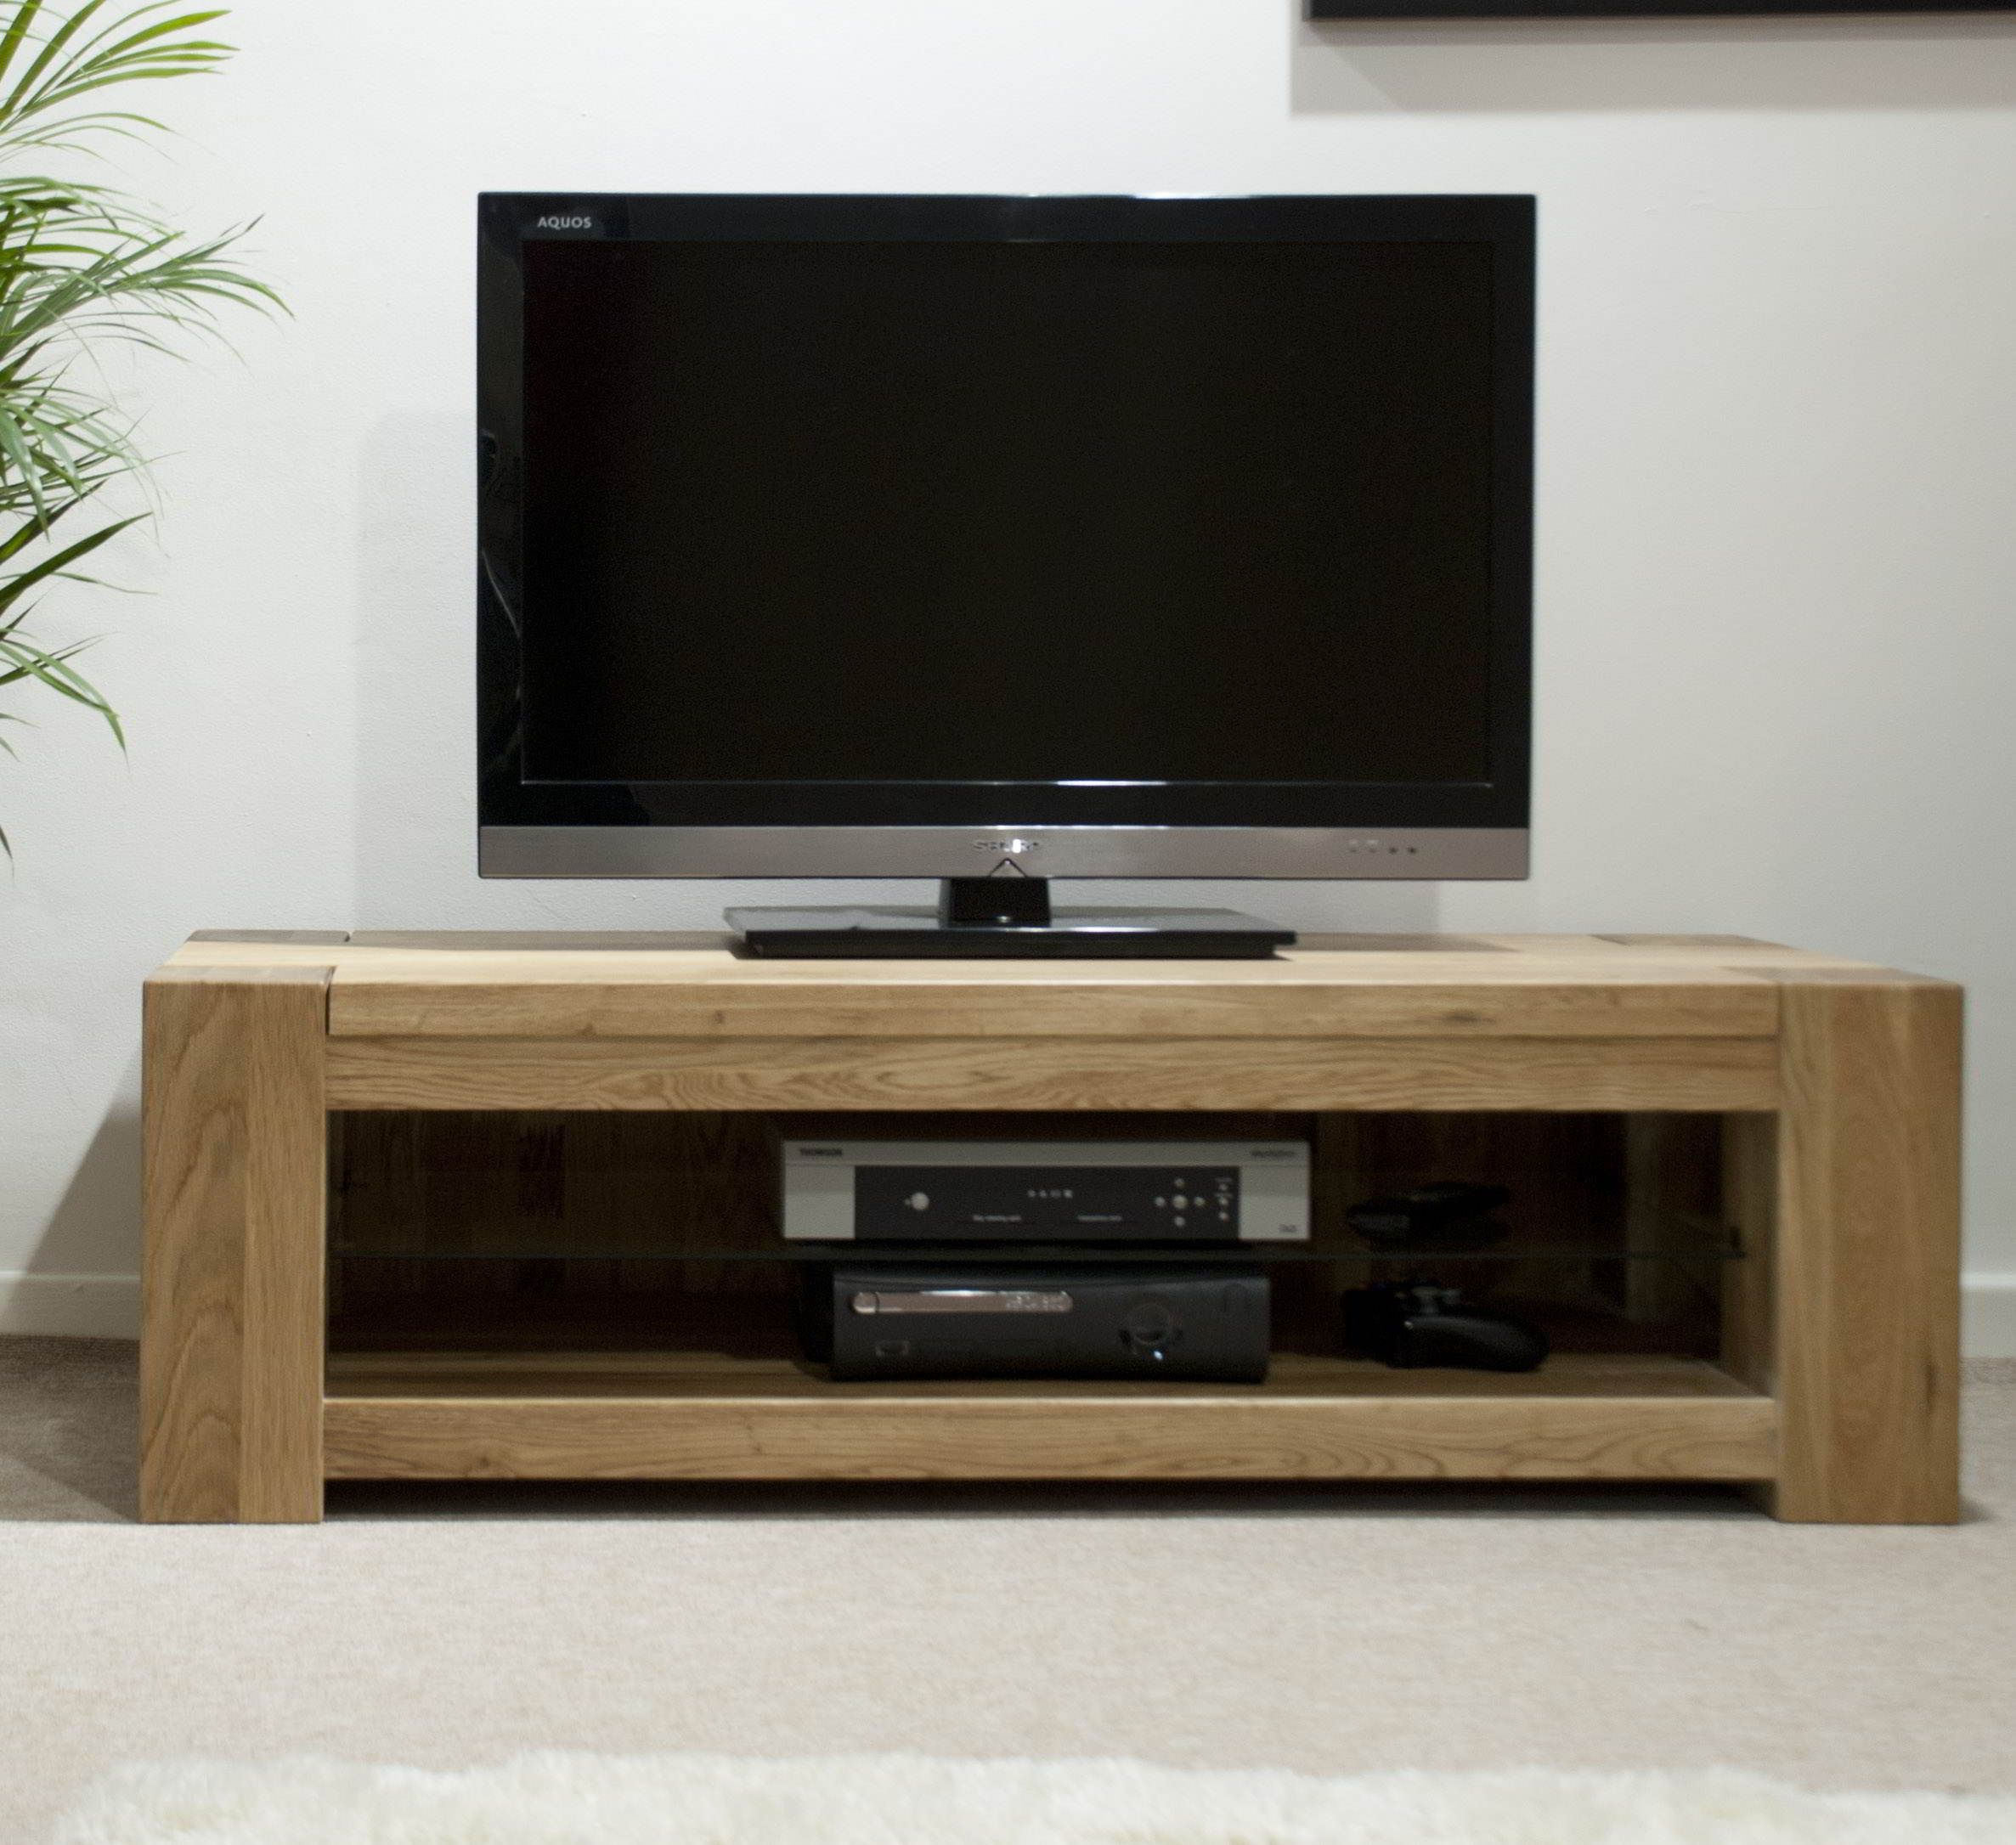 Padova Solid Oak Furniture Plasma Television Cabinet Stand Within Oak Furniture Tv Stands (View 2 of 15)